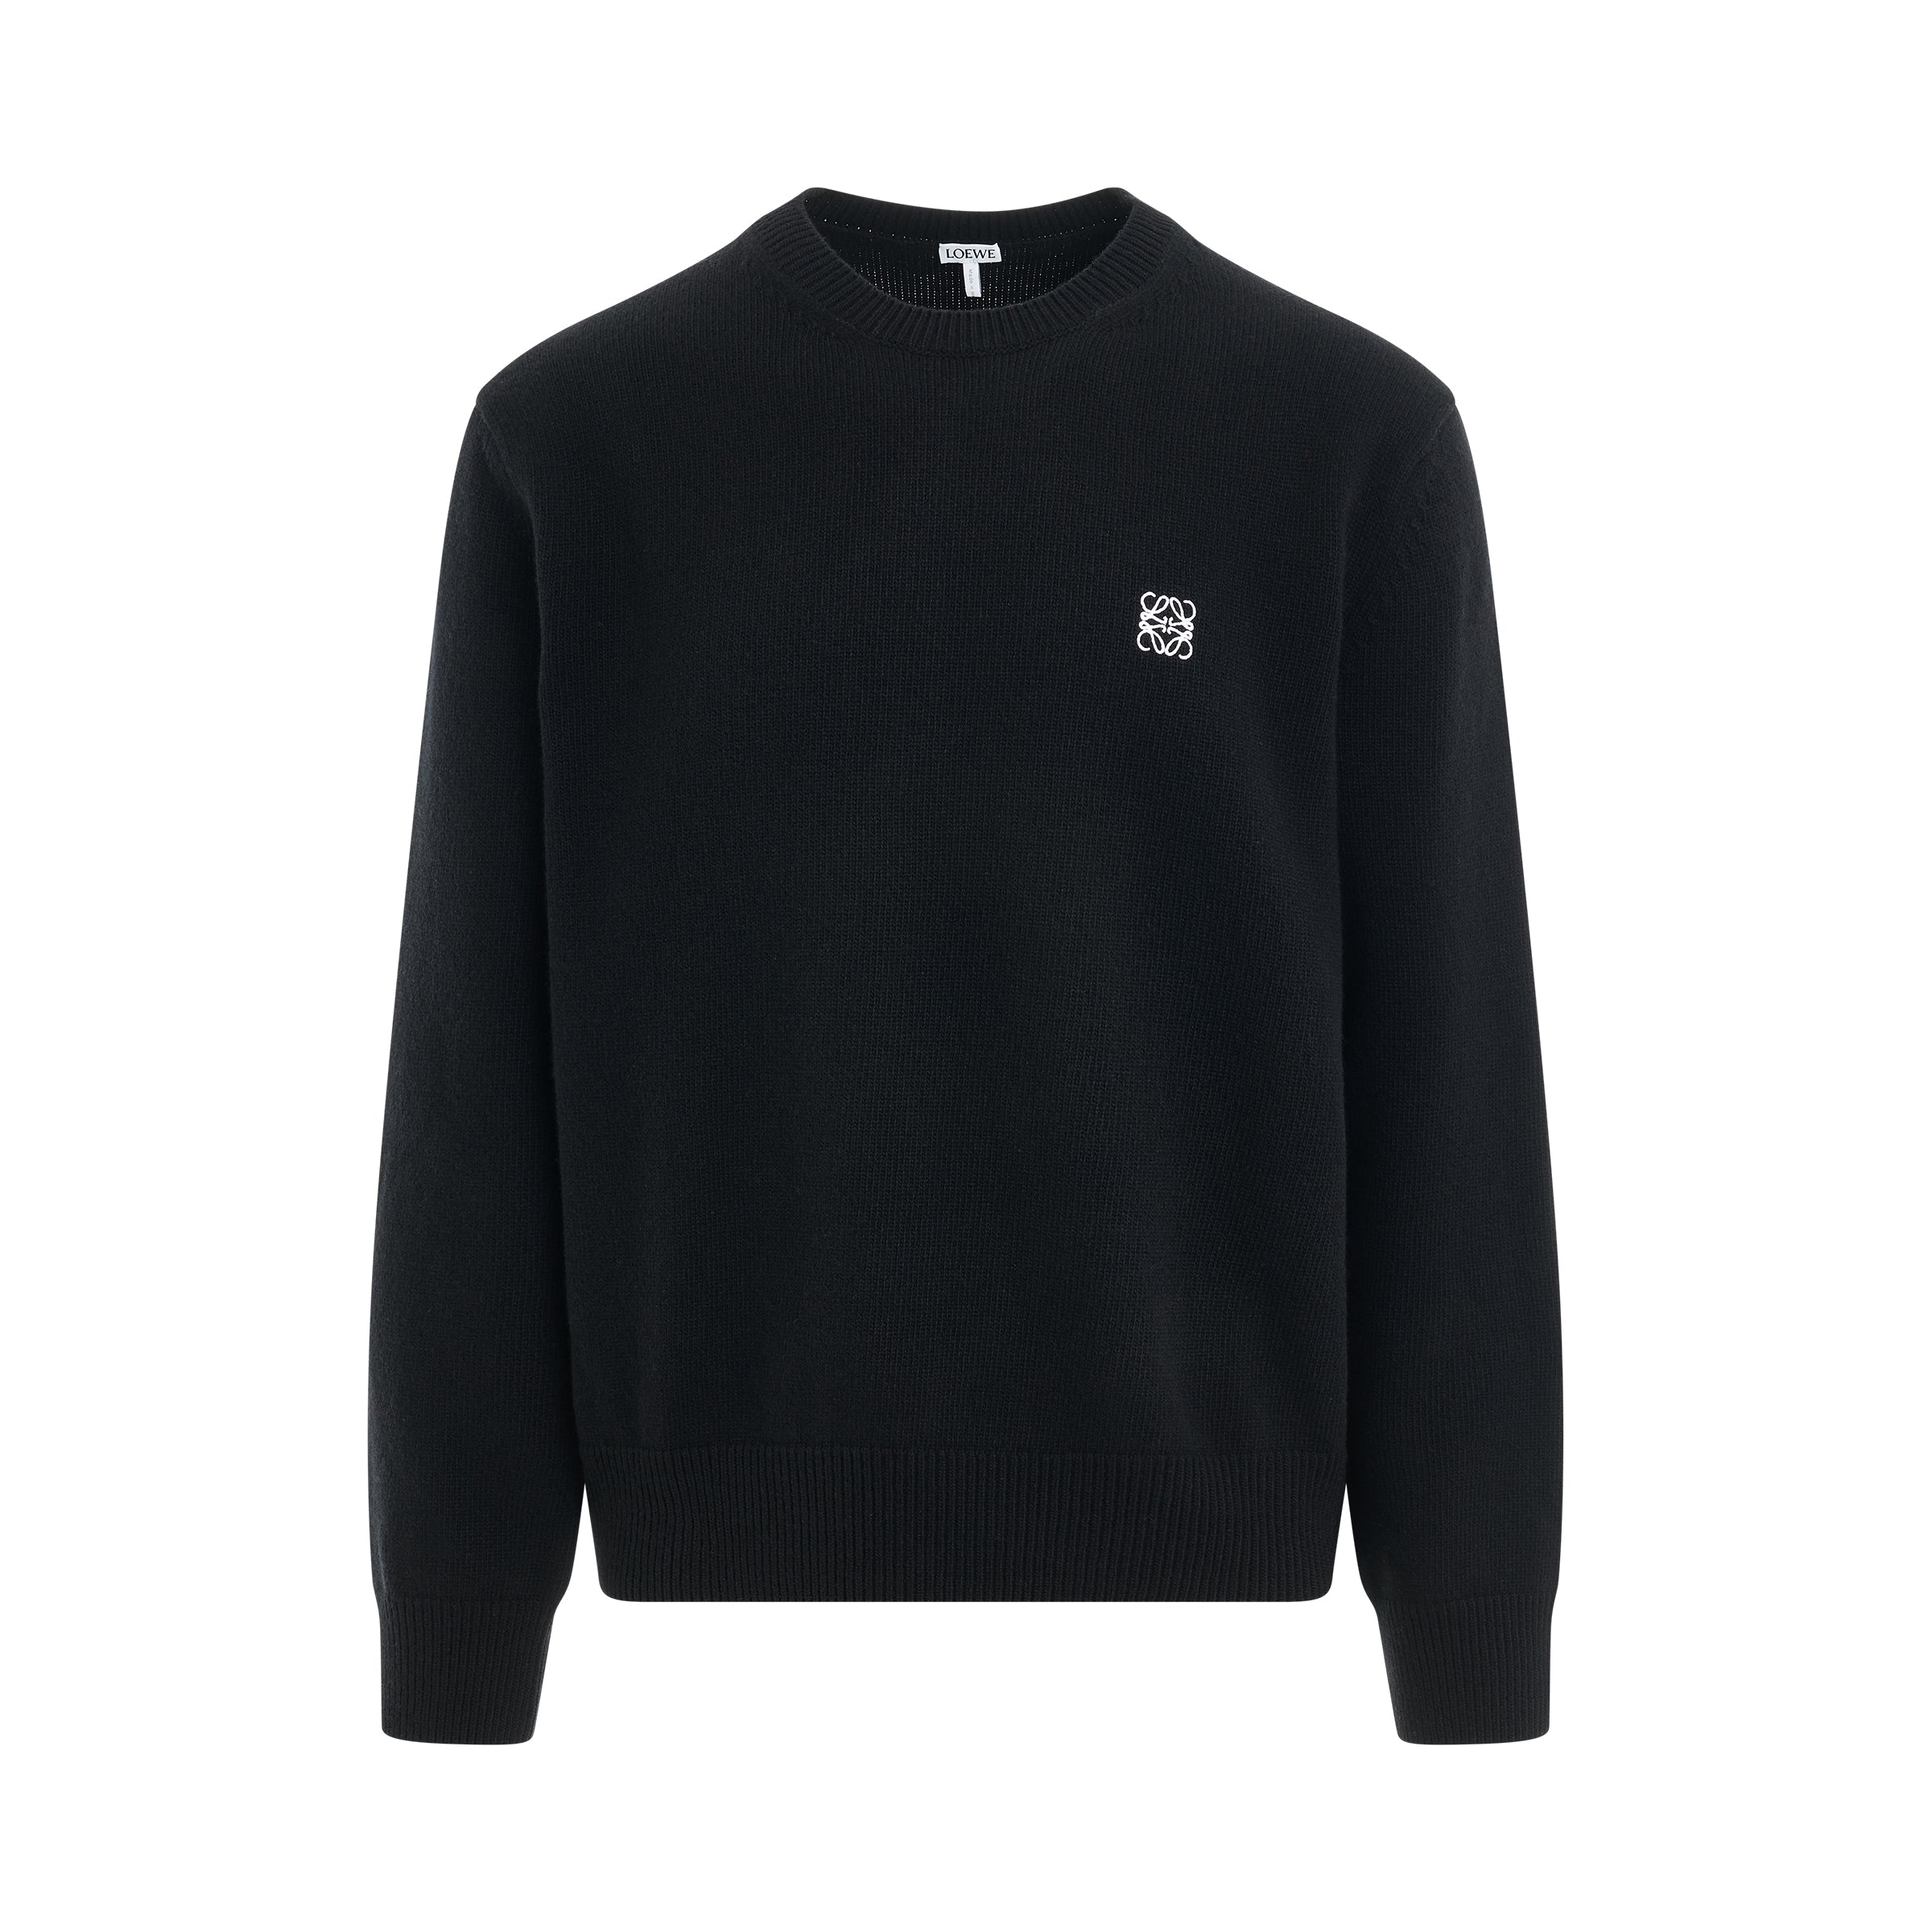 Anagram Embroidered Knit Sweater in Black